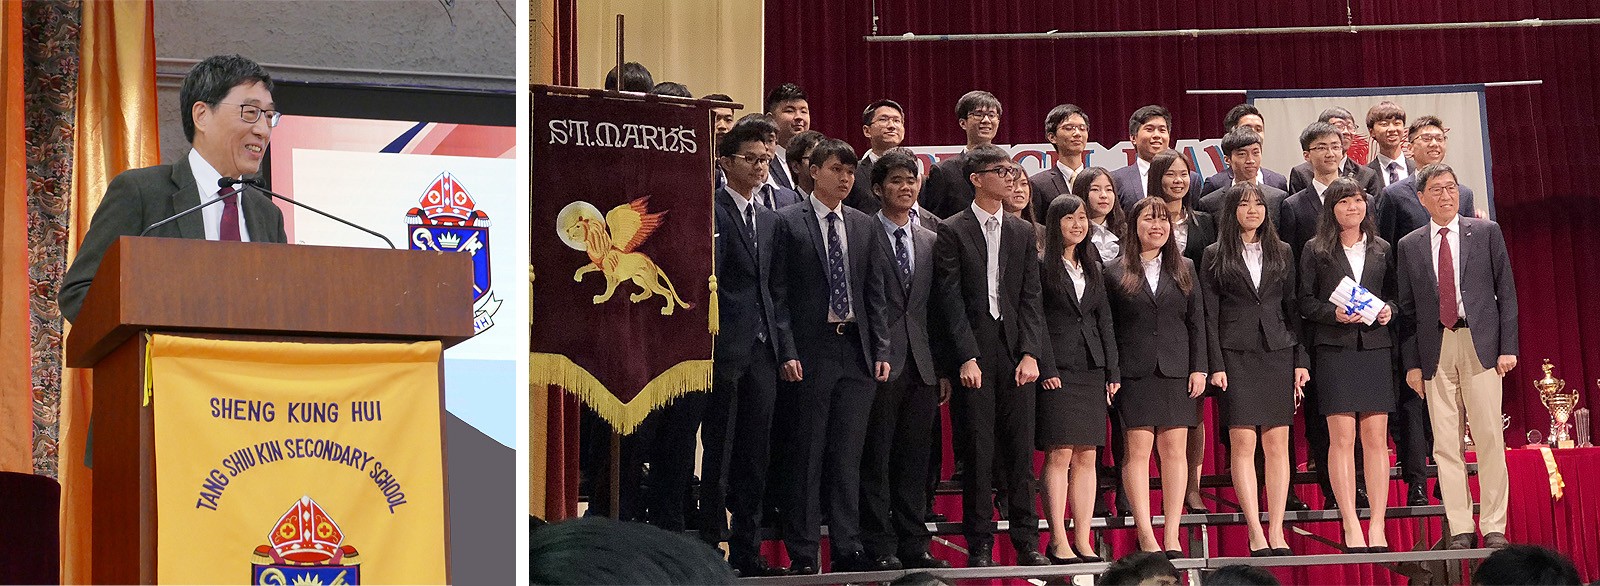 President Kuo attends speech days of two secondary schools. 